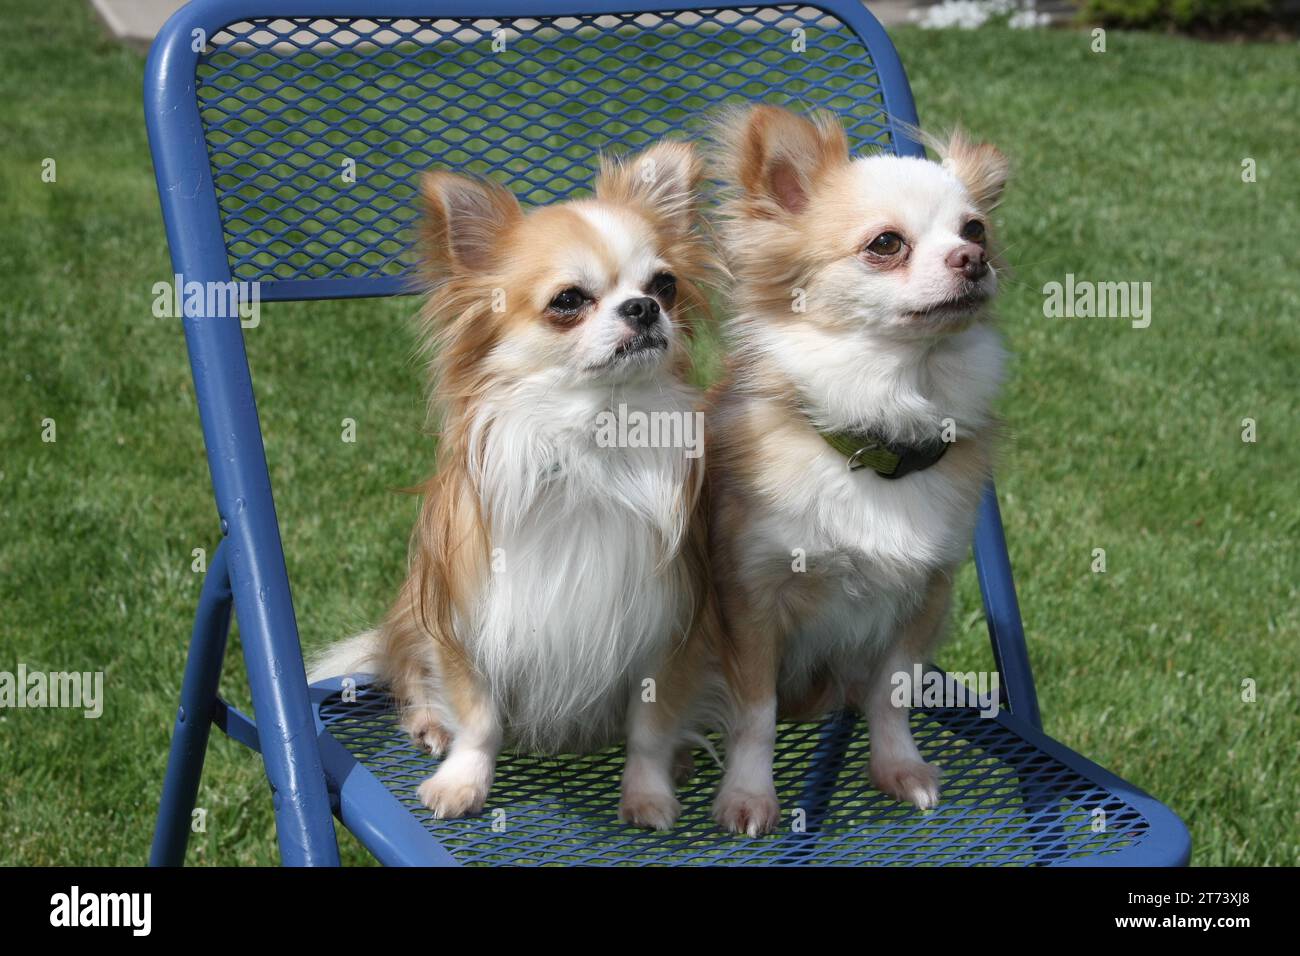 2 Longhaired Chihuahuas sitting on a blue chair at the park Stock Photo